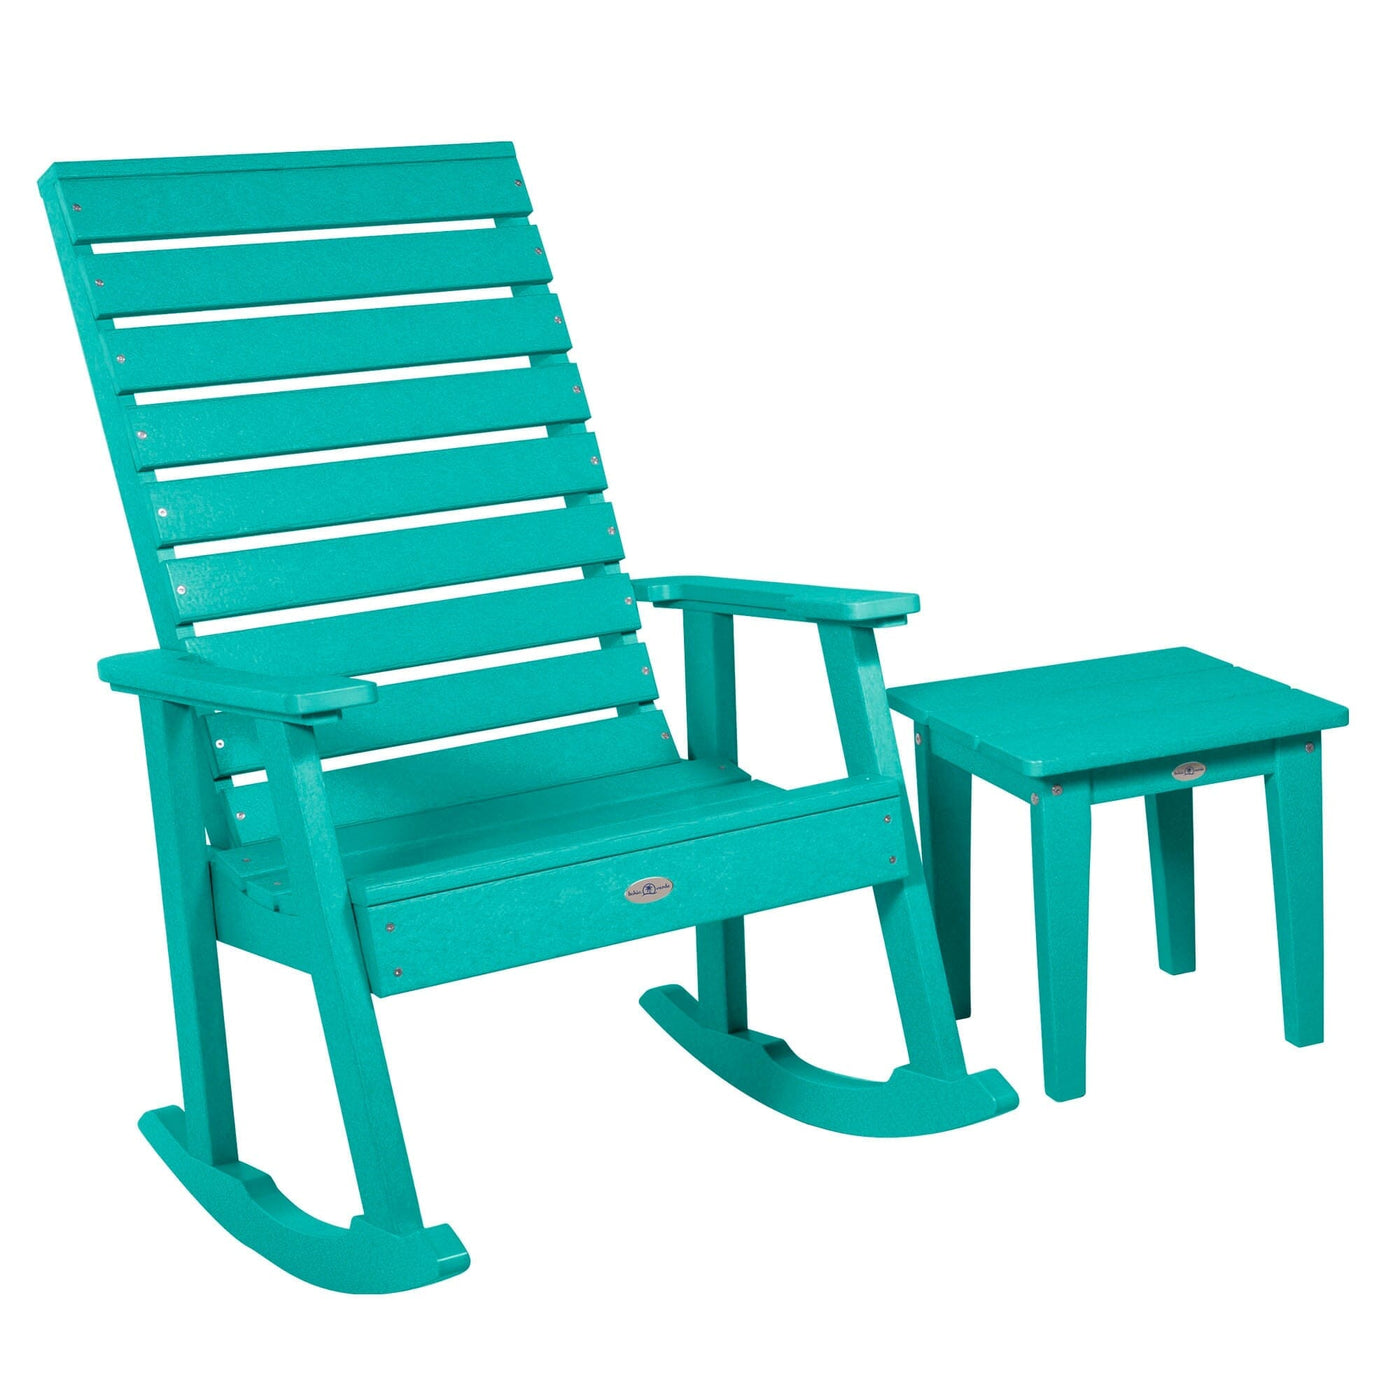 Riverside Rocking Chair and Side Table 2pc Set Kitted Set Bahia Verde Outdoors Seaglass Blue 